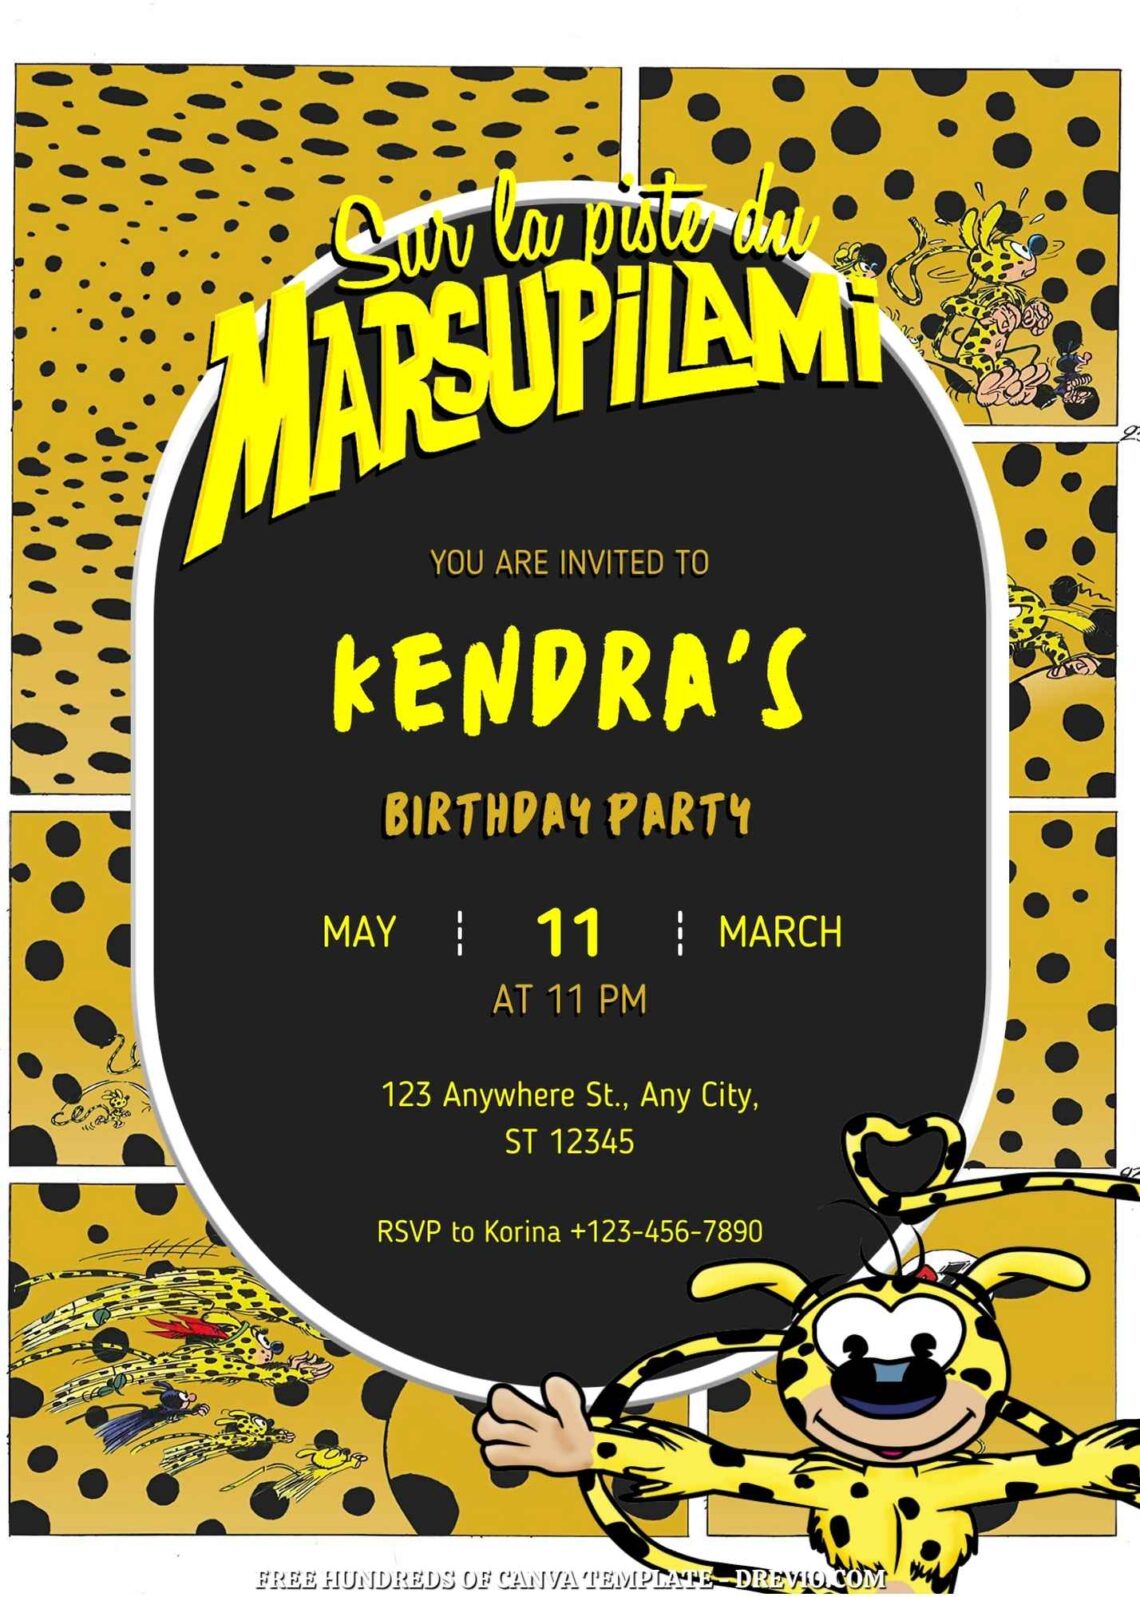 Free Marsupilami Birthday Invitations with Yellow Black Pattern in the Background